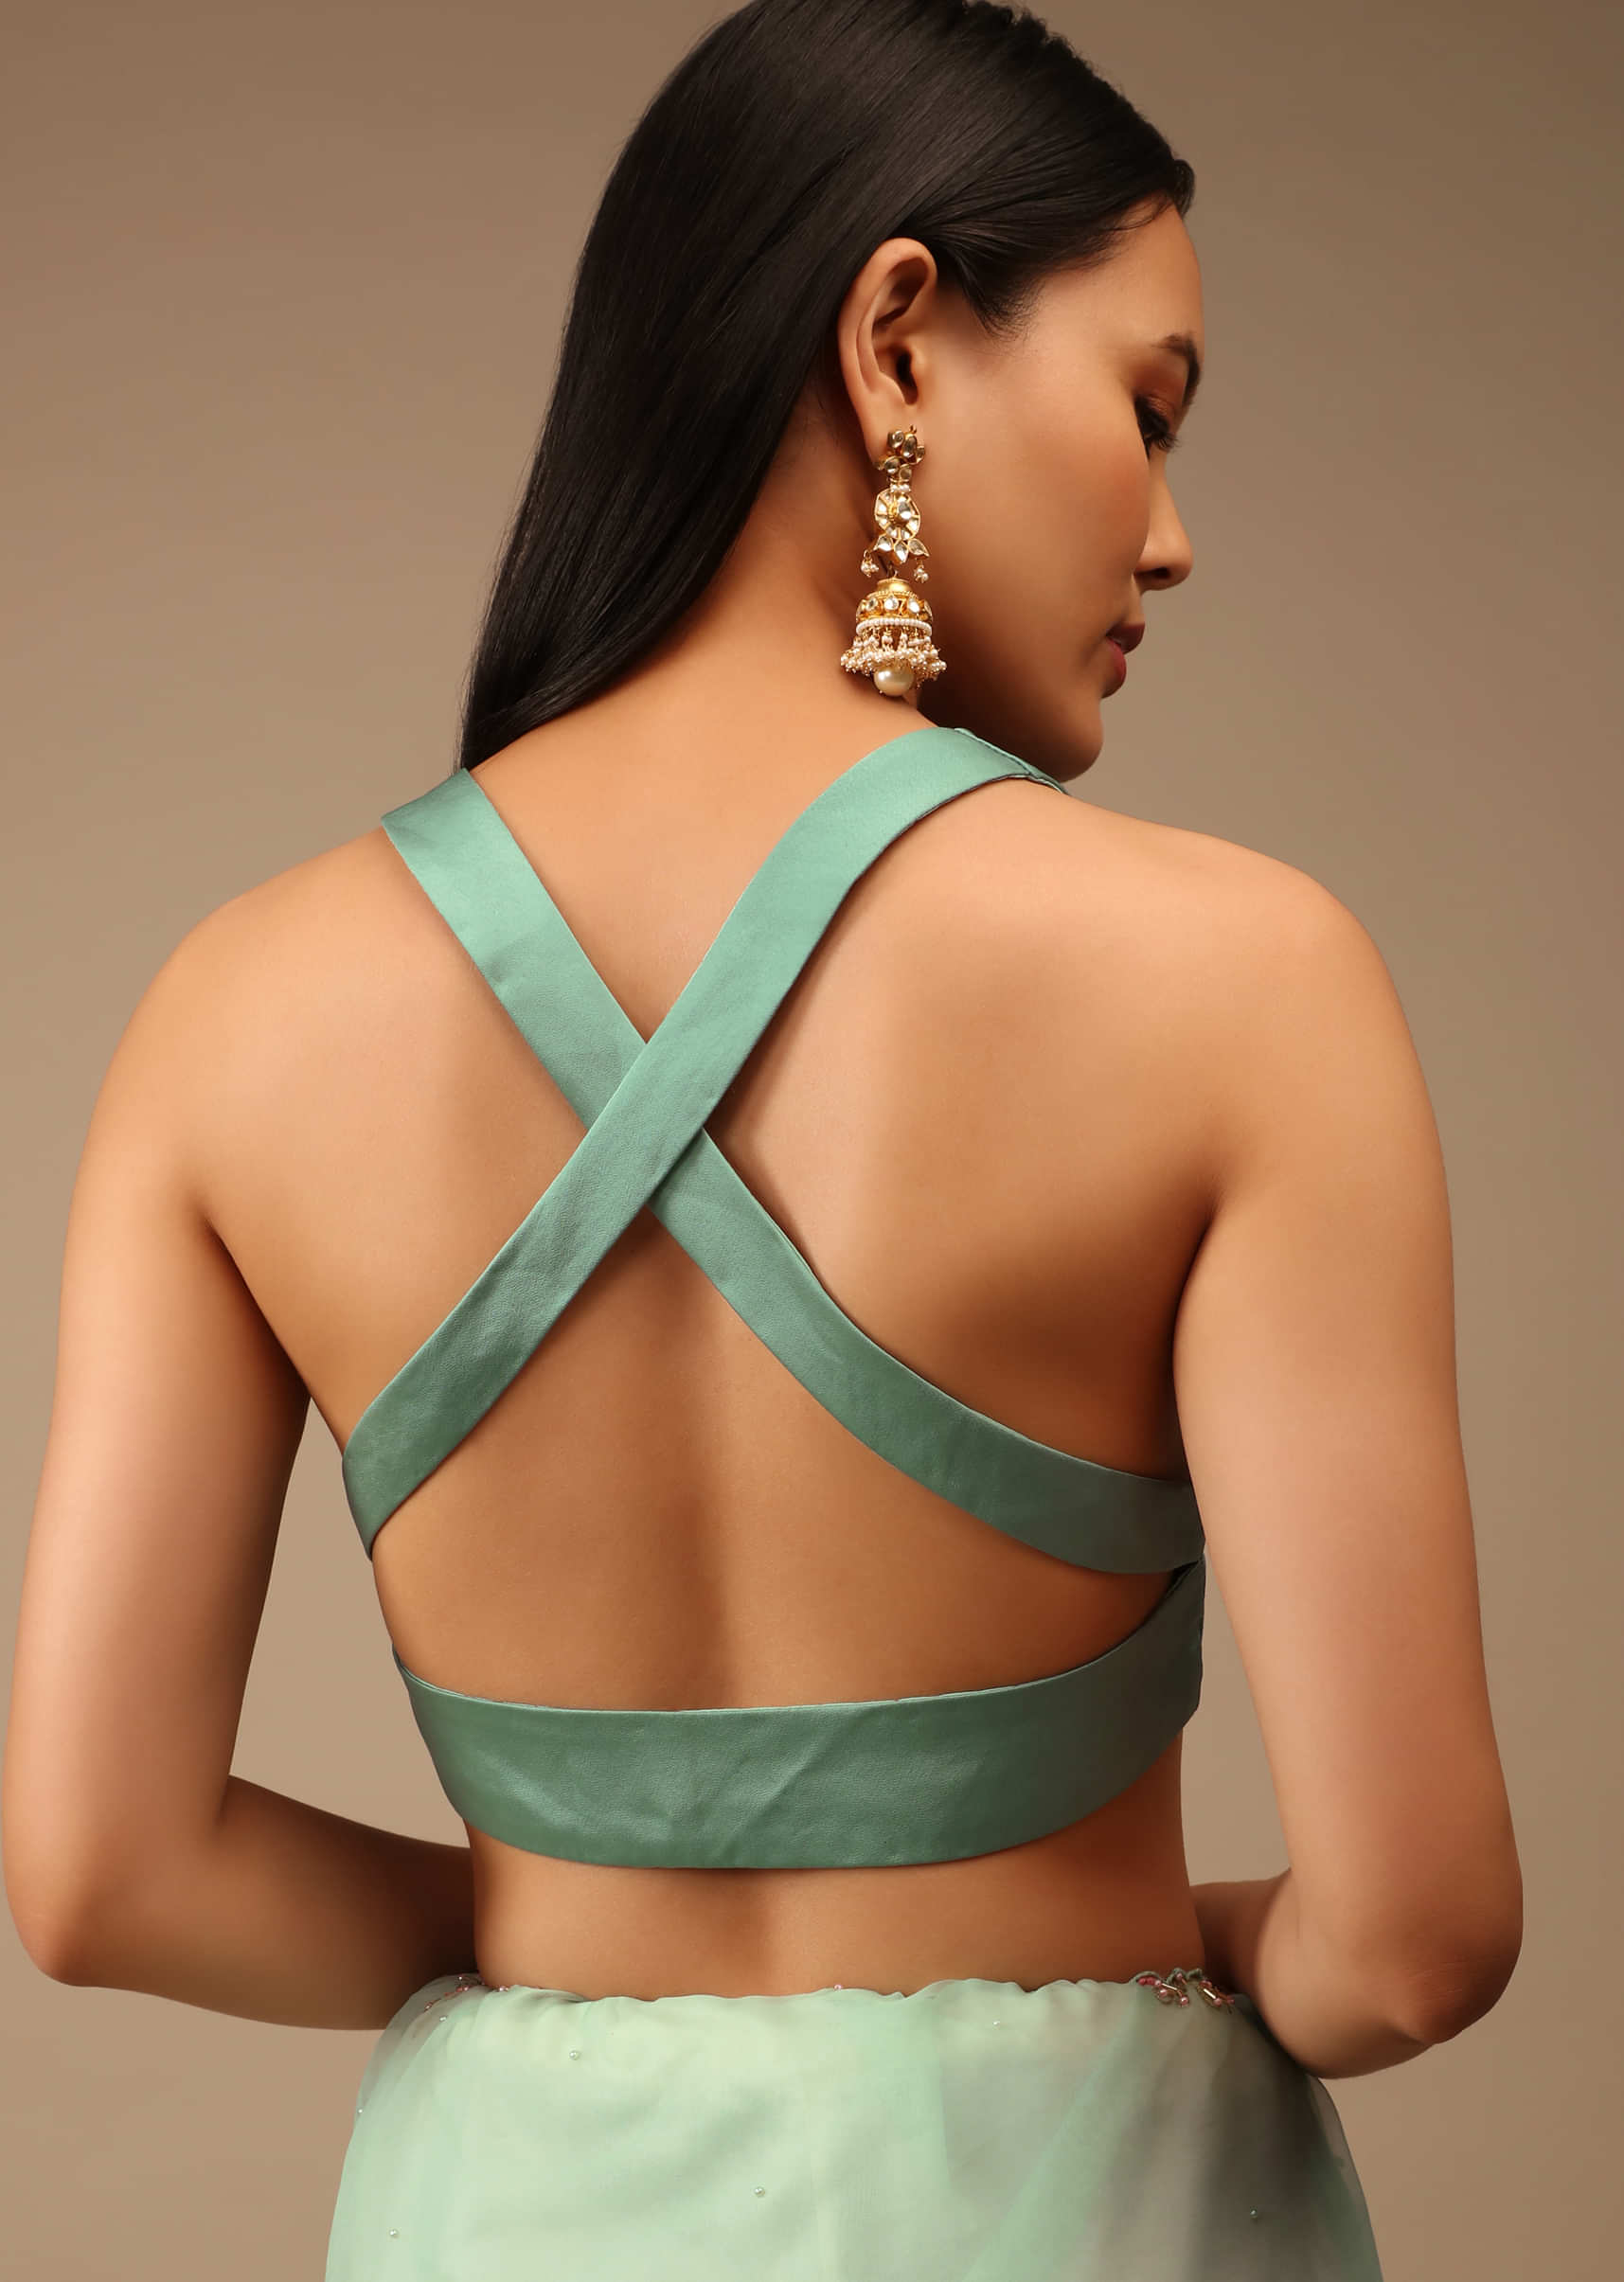 Dusty Jade Blouse In Satin With Plunging Geometric Neckline And Criss Cross Straps On The Back